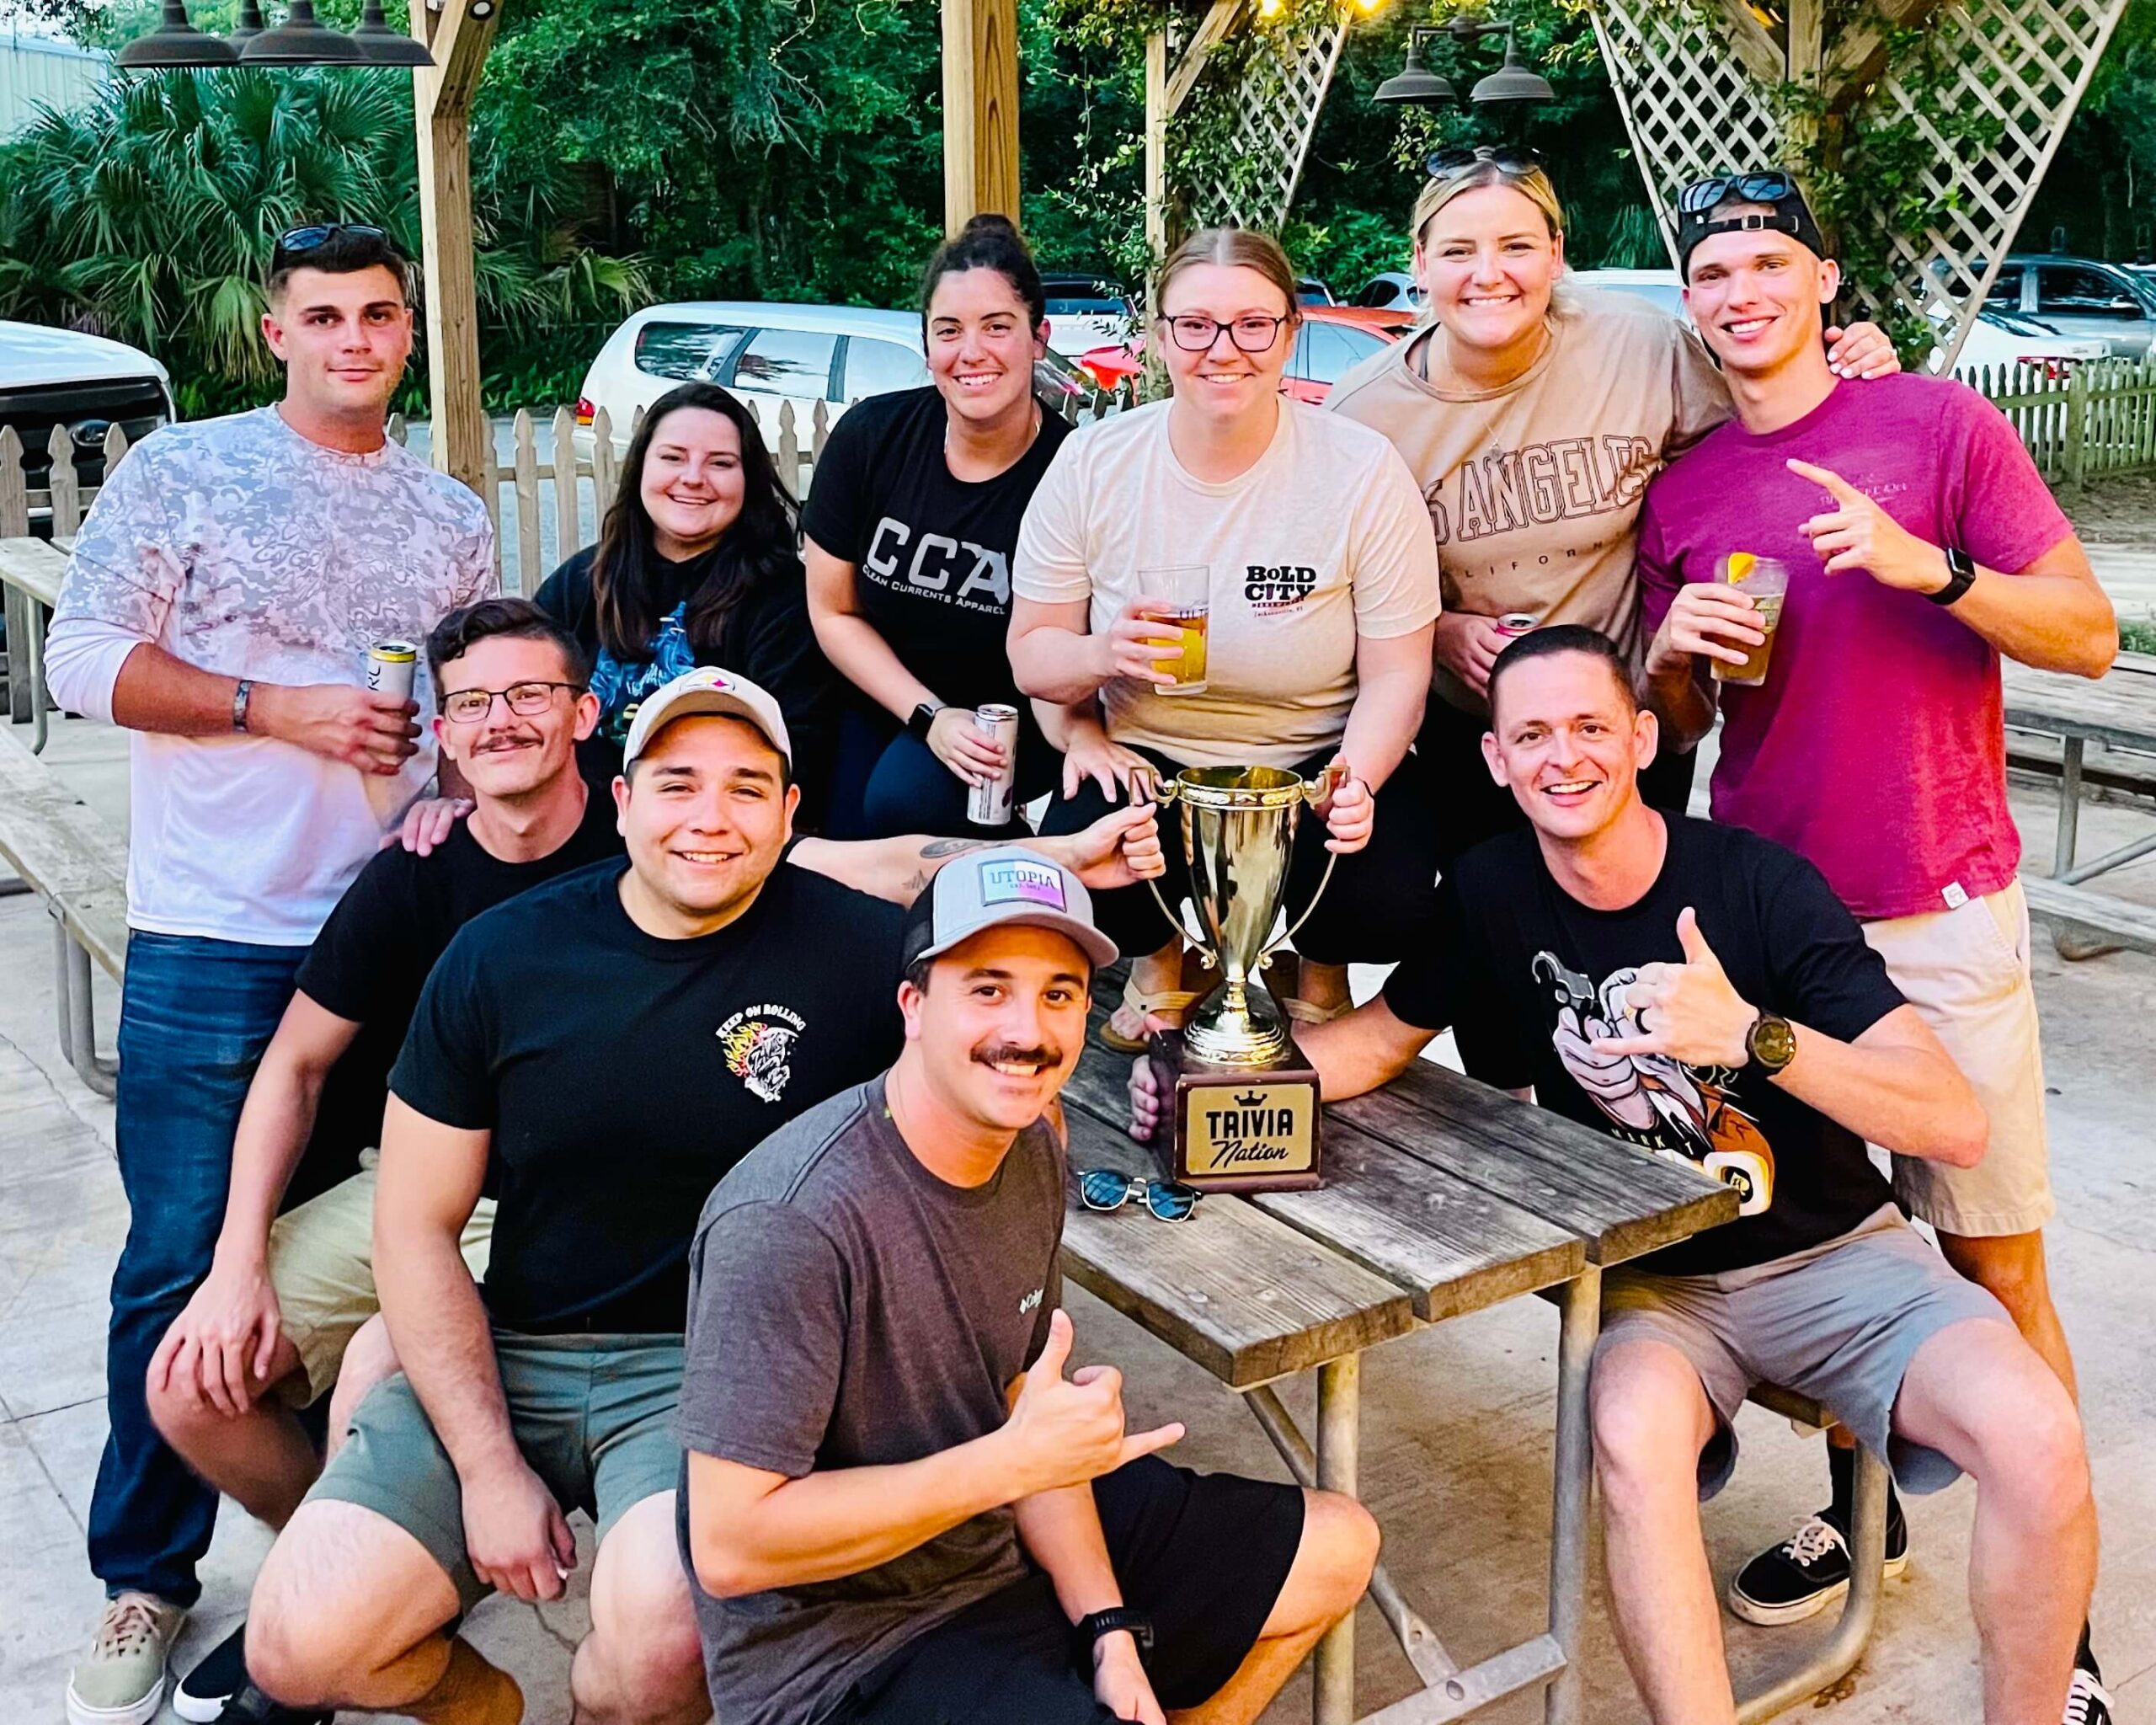 V Pizza & Tap Garden Jacksonville FL 32223 trivia night: large group of young people outside gathered around a patio table smiling with a Trivia Nation trophy in the middle